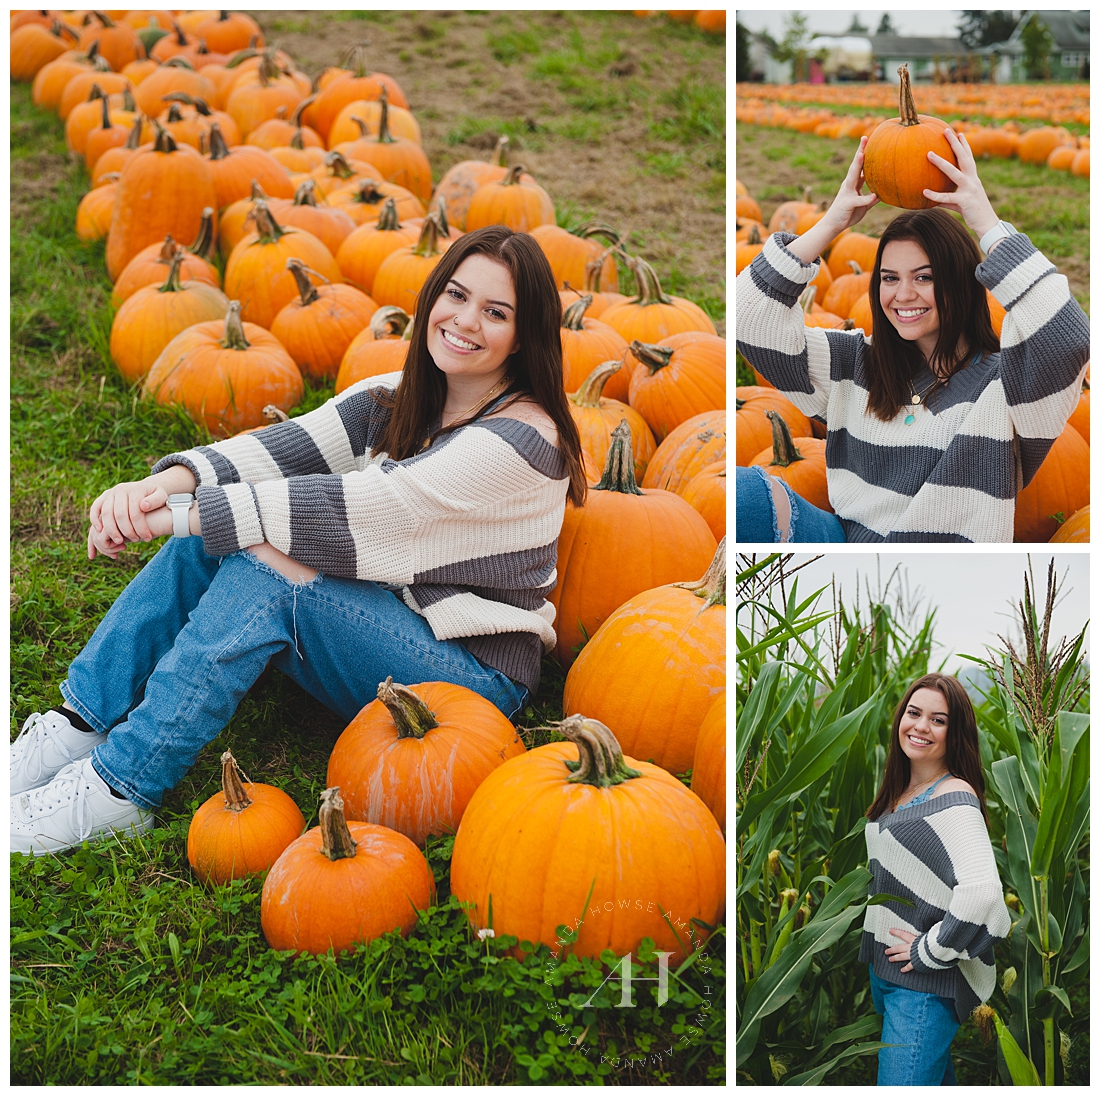 Outfit Ideas for the Pumpkin Patch | Pose Ideas for Senior Girls, Location Ideas, Outfit Inspiration | Photographed by Tacoma Senior Photographer Amanda Howse